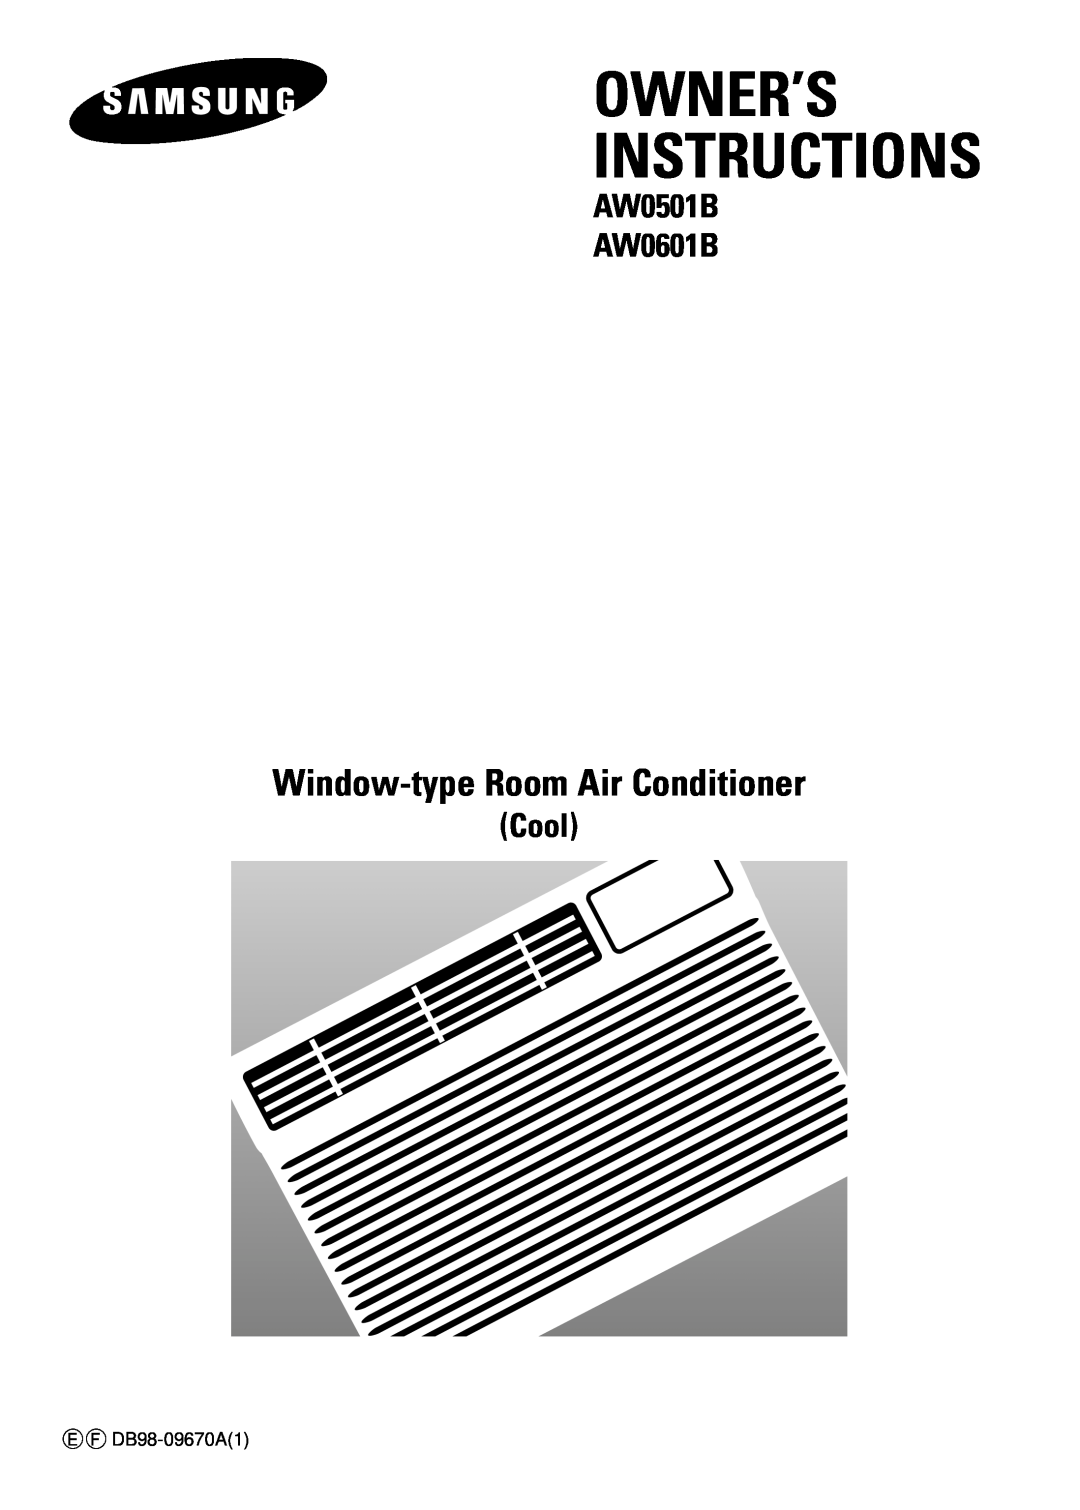 Samsung manual Owner’S Instructions, Window-typeRoom Air Conditioner, AW0501B AW0601B, Cool 